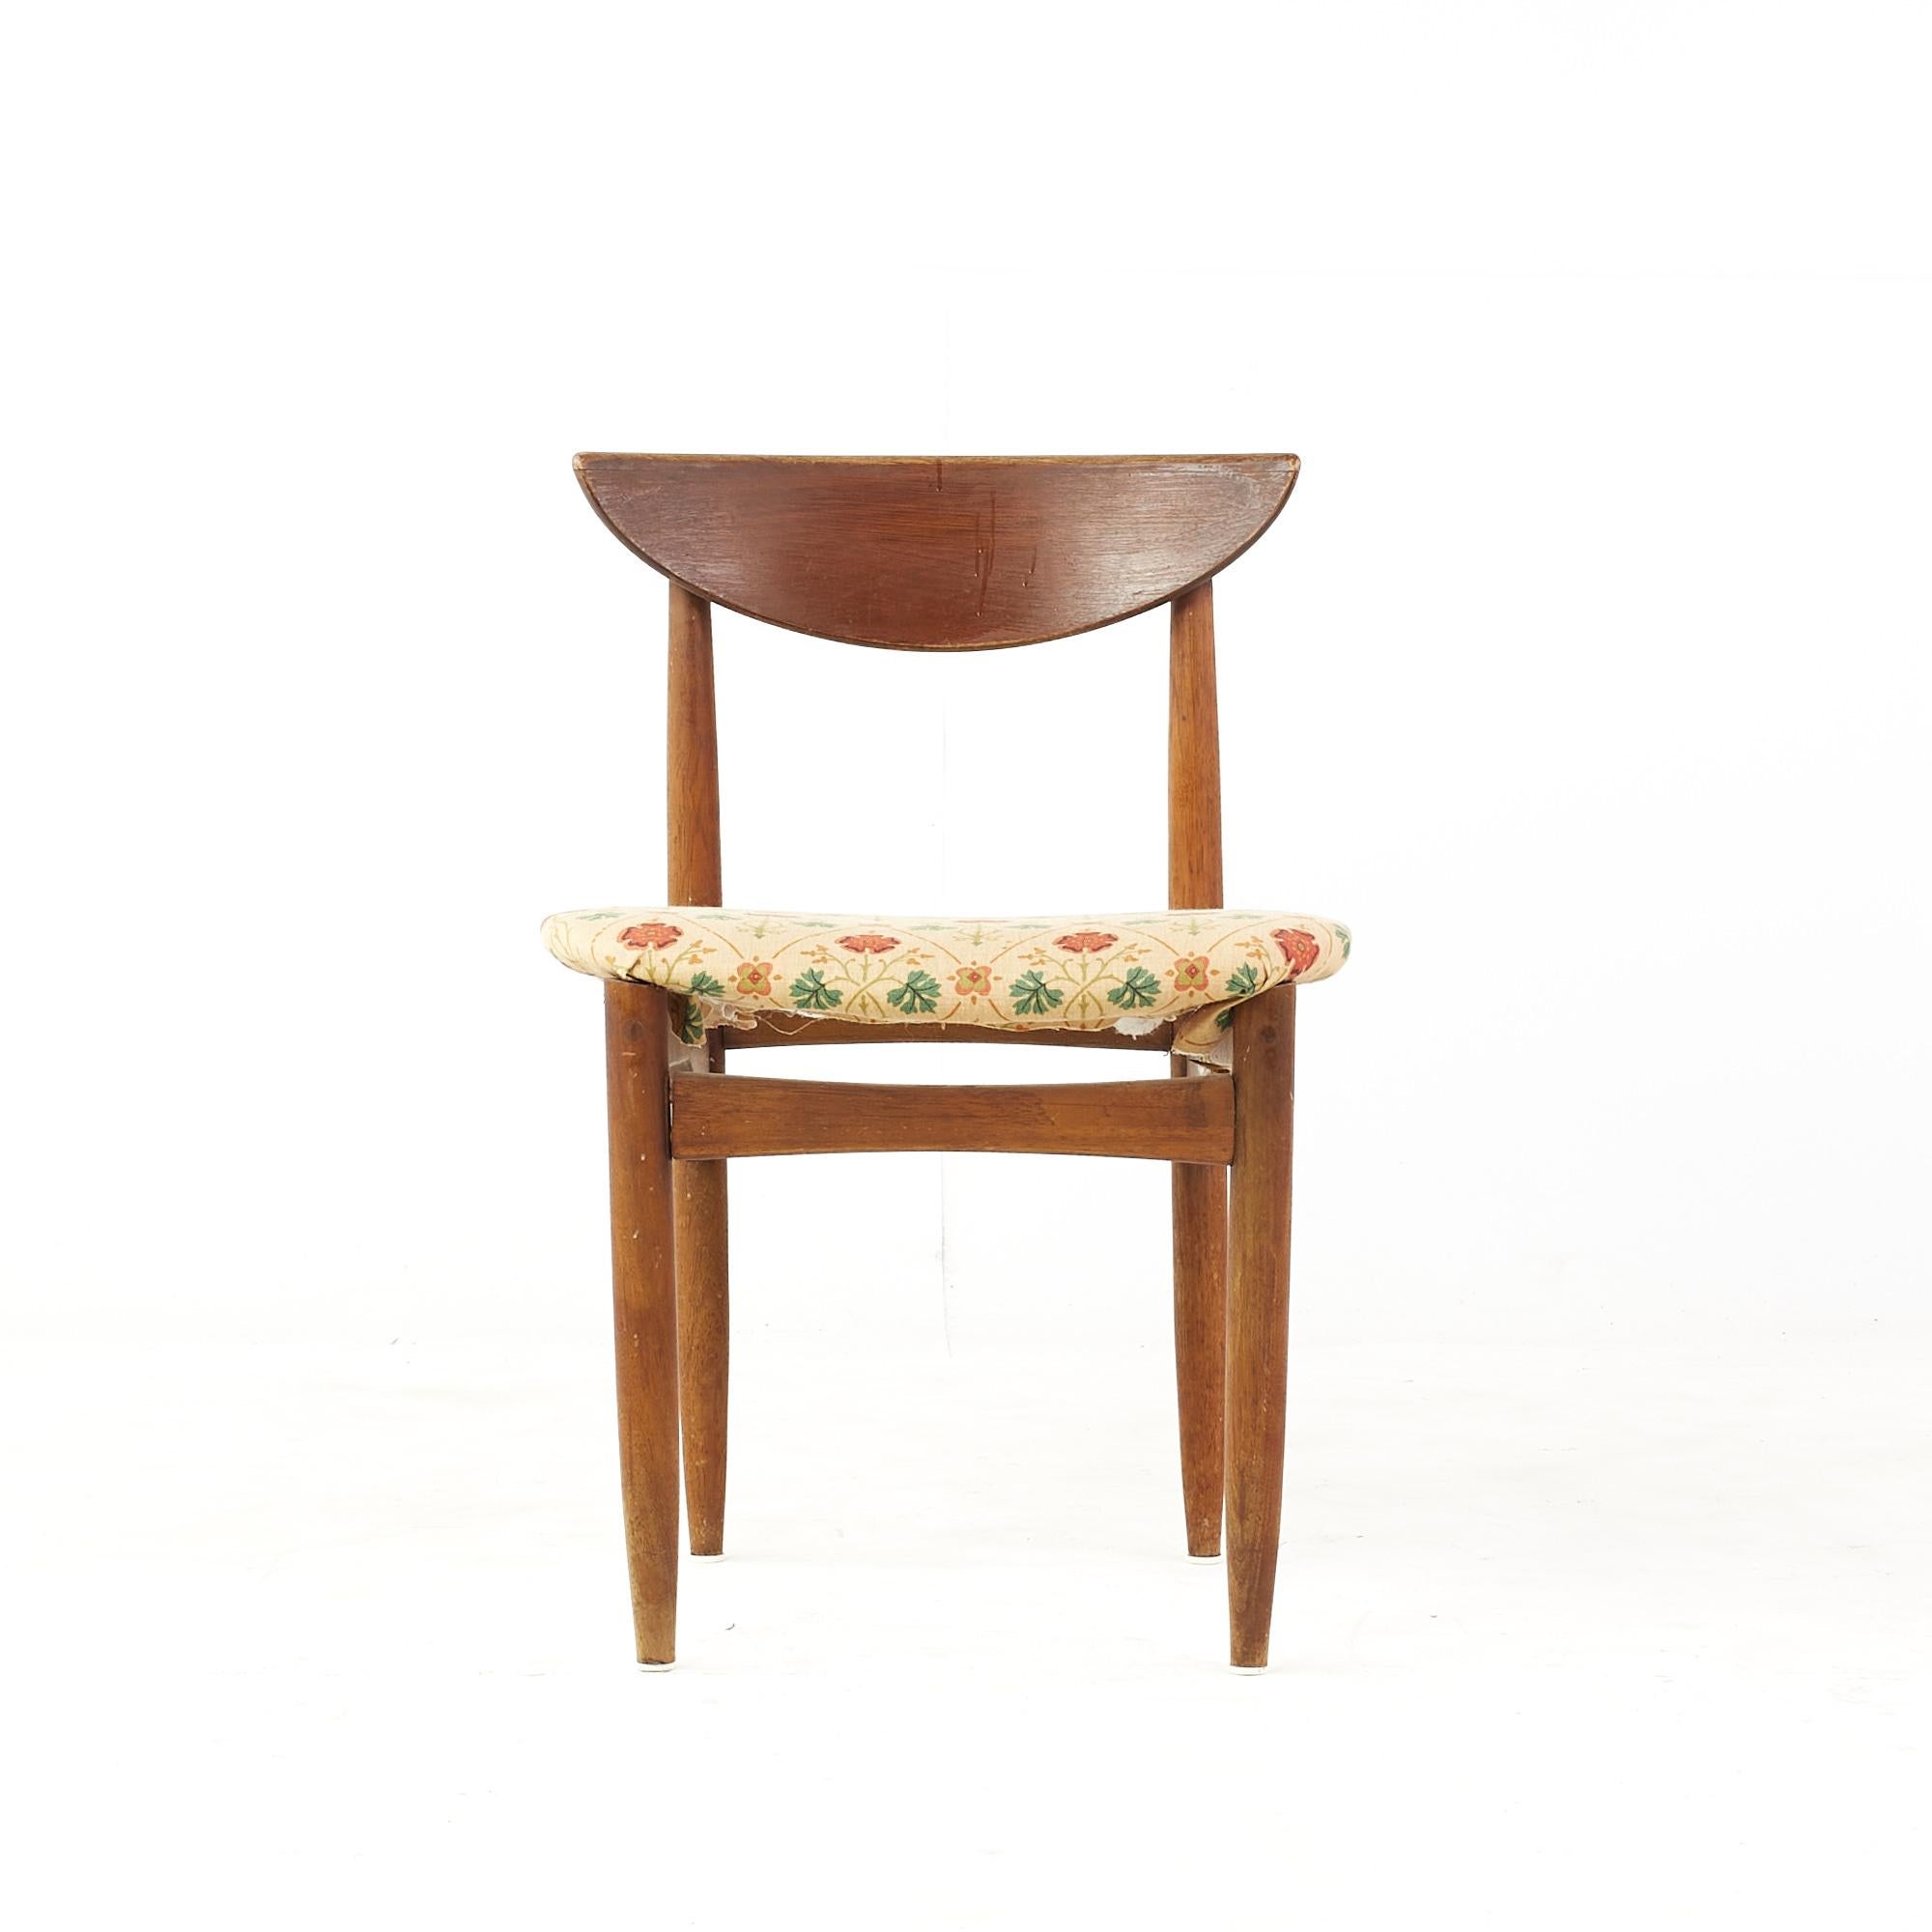 Lane perception mid century dining chair - single

This chair measures: 20.75 wide x 20 deep x 30.5 inches high, with a seat height of 18.25 inches

All pieces of furniture can be had in what we call restored vintage condition. That means the